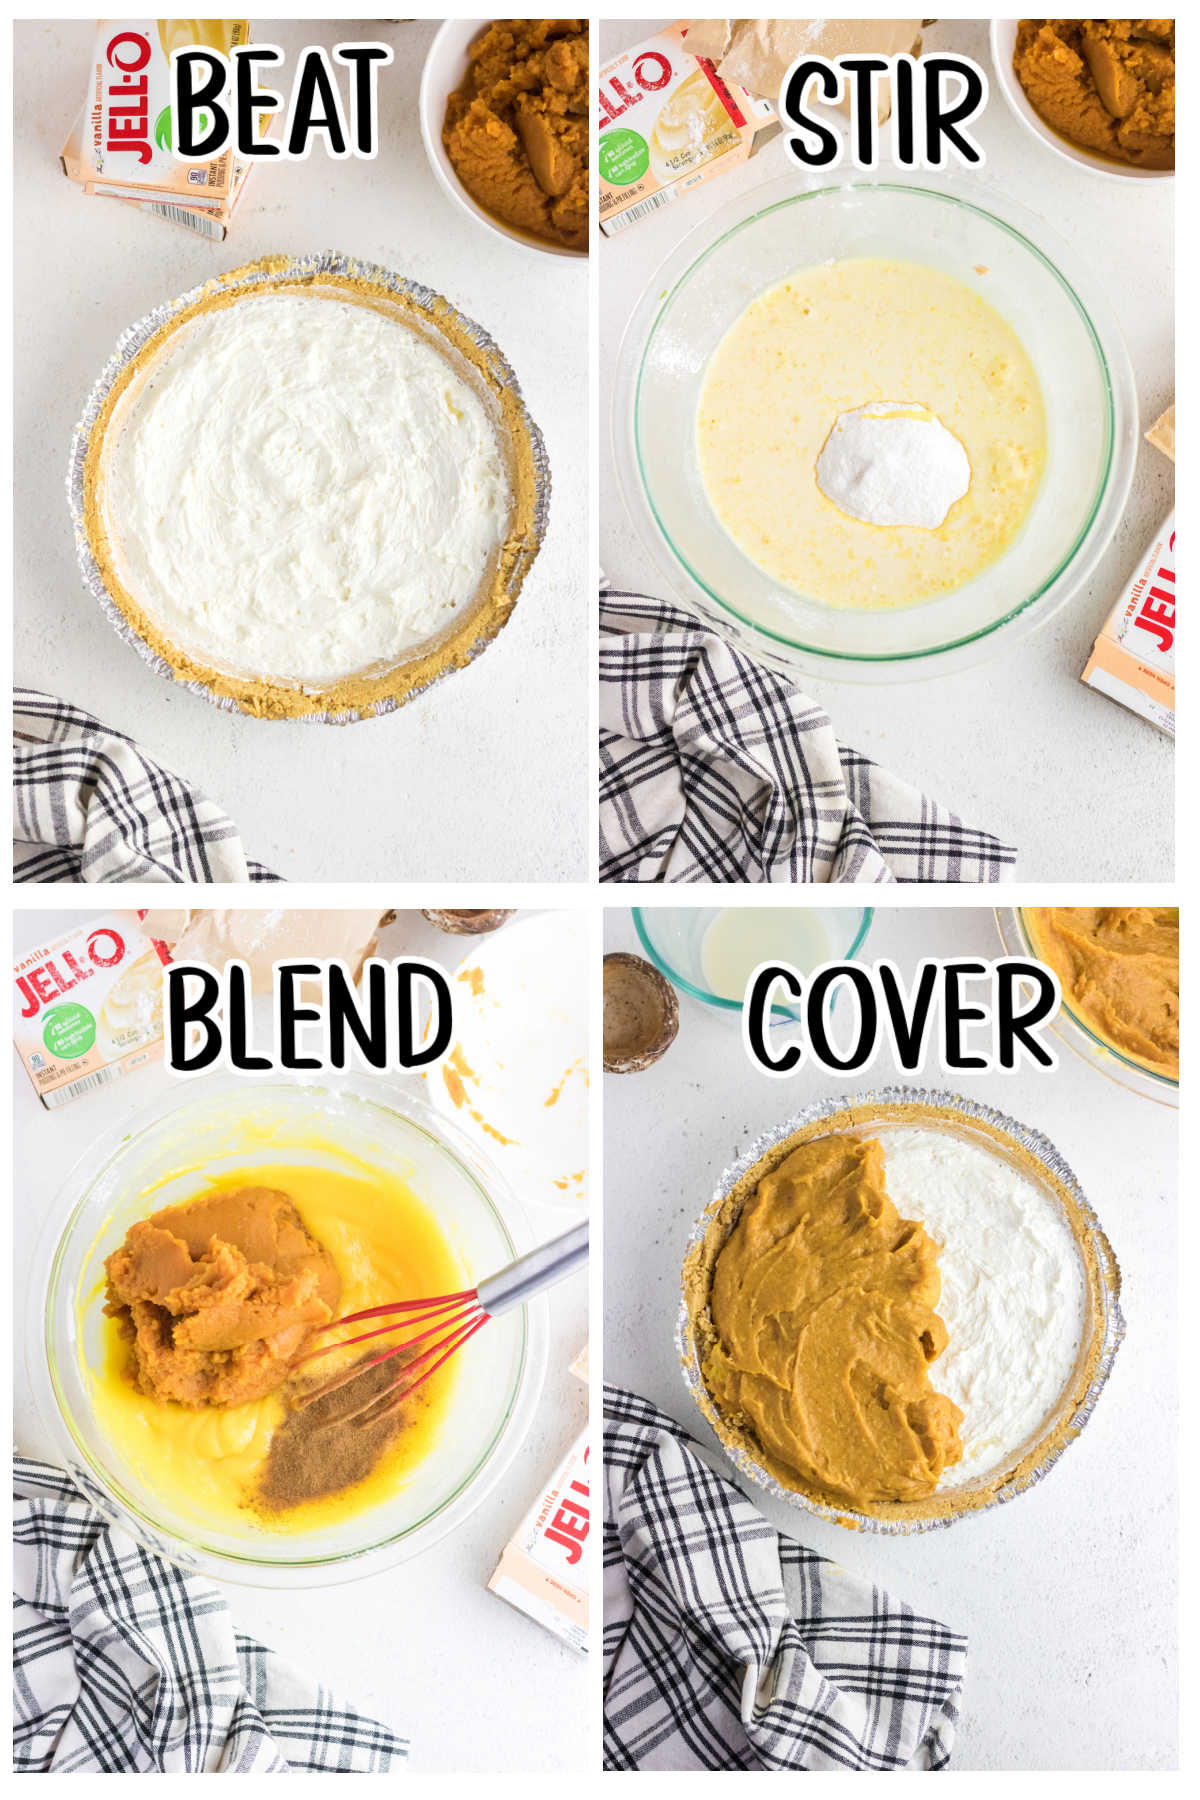 Step by step images showing how to make this pumpkin pie.